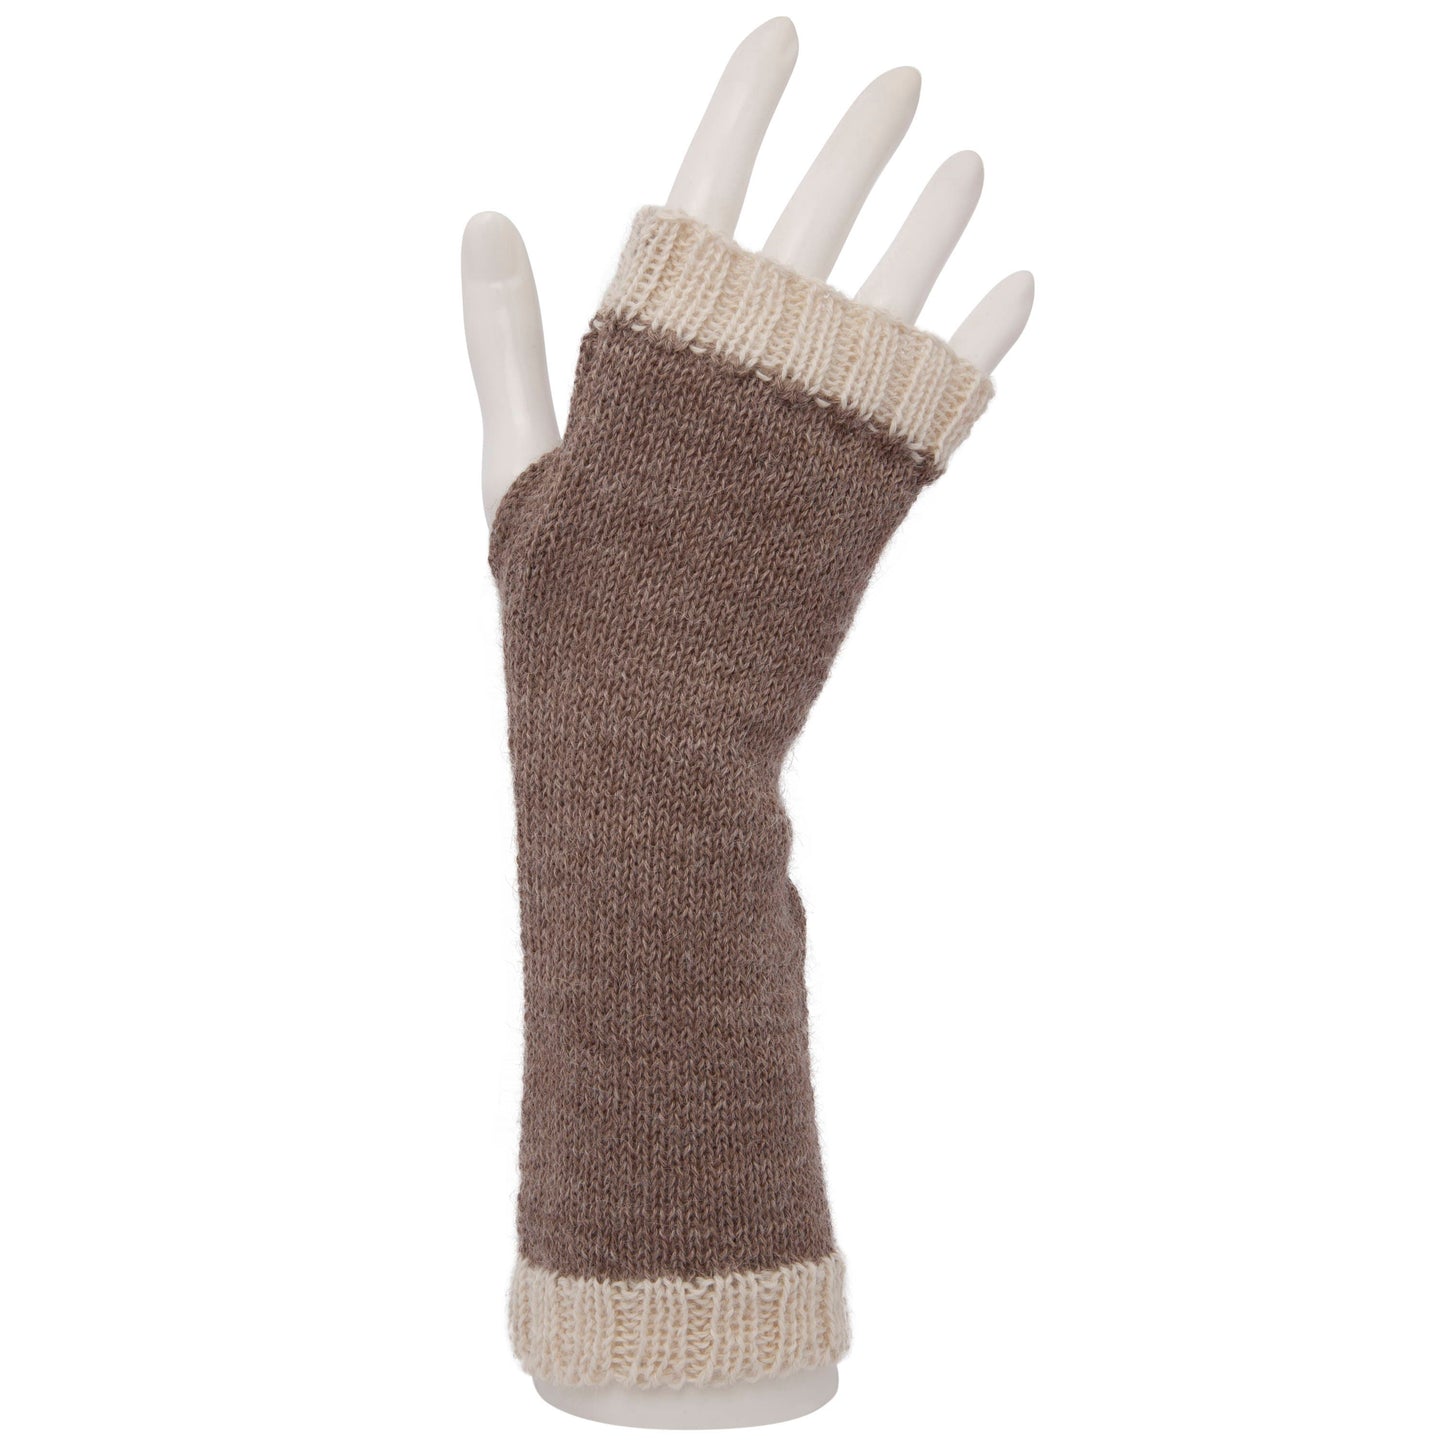 100% Alpaca Fingerless Mittens, Hand warmers, Wool knit Gloves, Wrist warmers, Fair trade, ethical gift, eco friendly, plastic free, warm